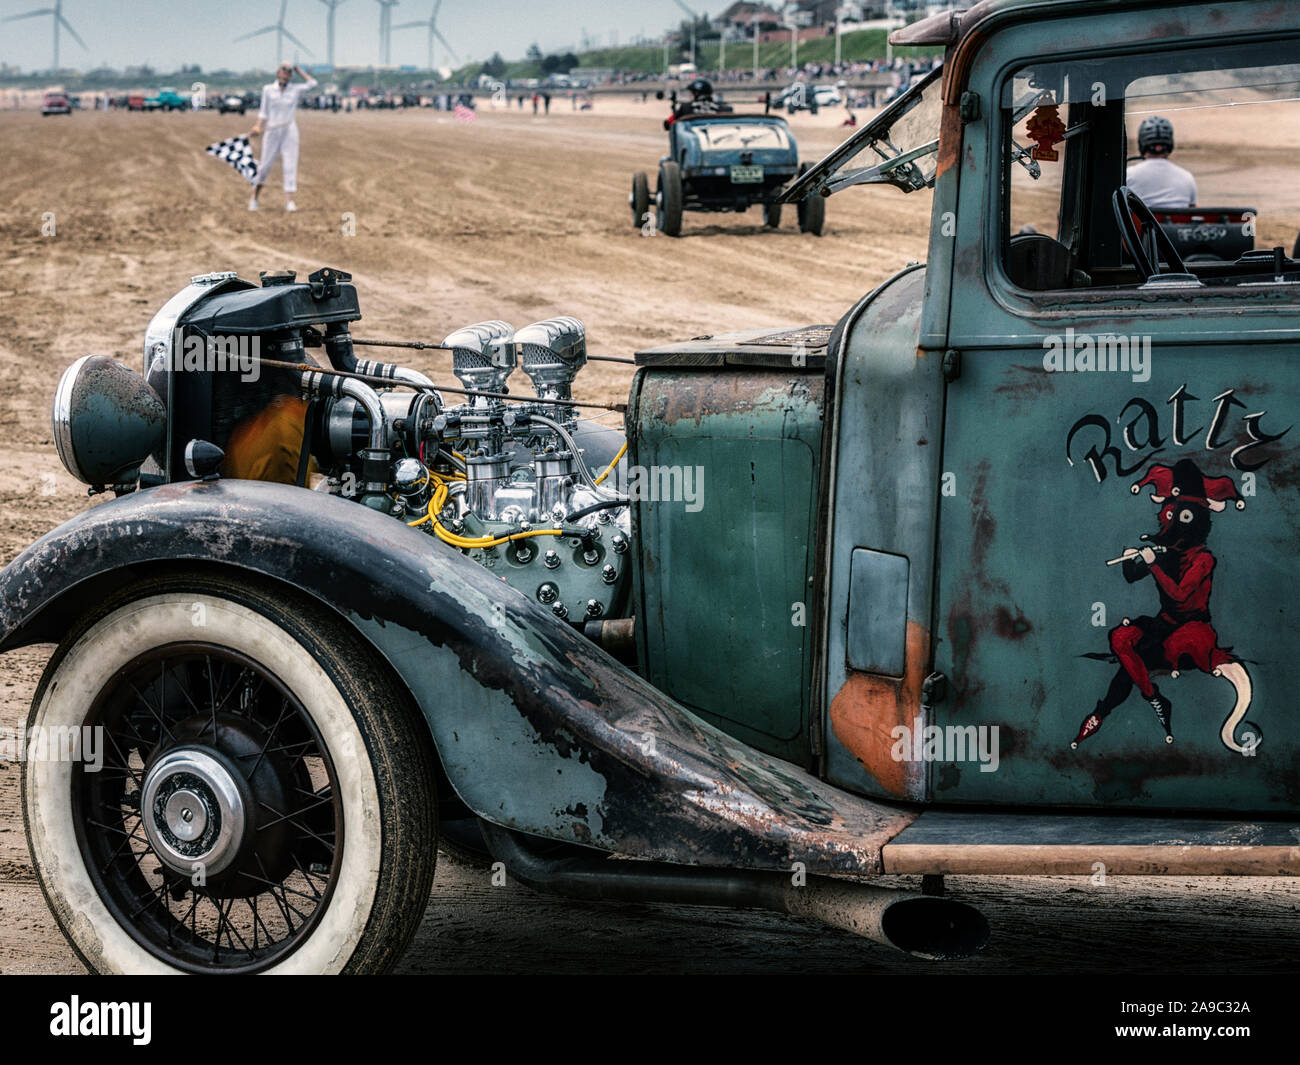 Vintage hot rods line up at the 'Race the Waves' event, where cars and motorcycles drag race on the beach at Bridlington, East Yorkshire England UK Stock Photo